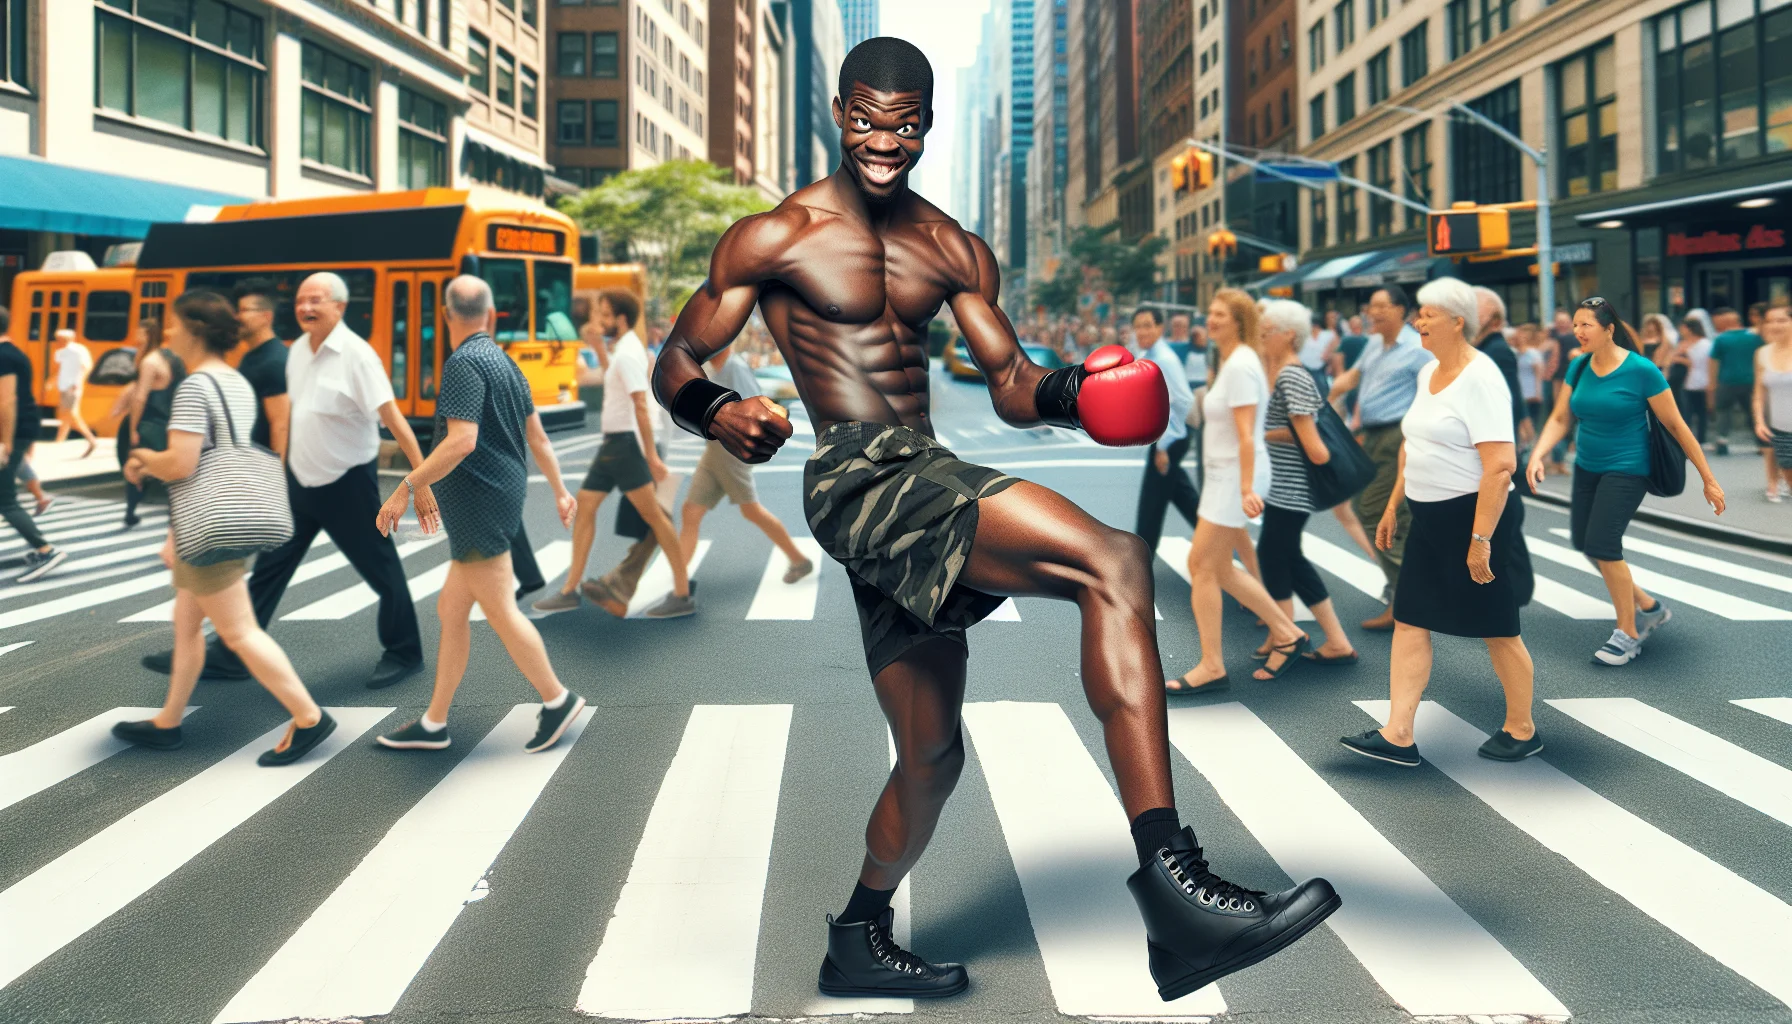 Showcase an amusing scene that encourages exercise. The main focus is on an athlete of Black descent, with a powerful physique, demonstrating a textbook-perfect kickboxing stance. The kickboxer has a spry grin on their face that adds humor to the situation. Perhaps they are on a busy pedestrian crosswalk, perfectly balanced amidst the bustling crowd who seem awestruck by the sudden exhibition of sportsmanship. Create a realistic backdrop with a vibrant palette to make the scene inviting and motivate people to jumpstart their personal fitness journeys.